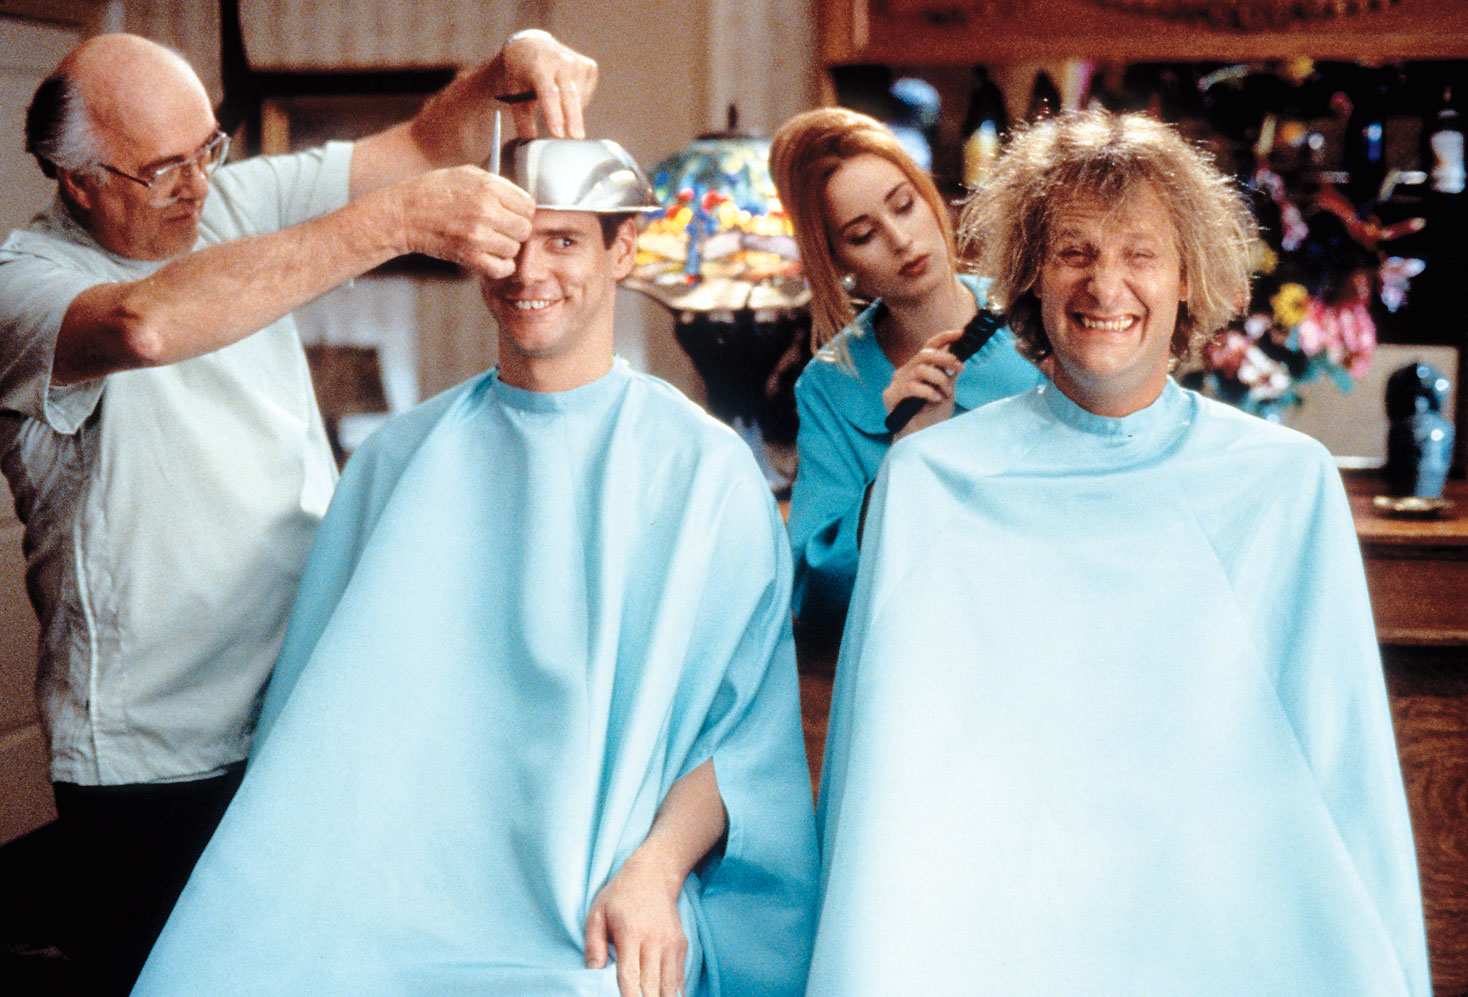 Two crazy looking men at a hairdresser.